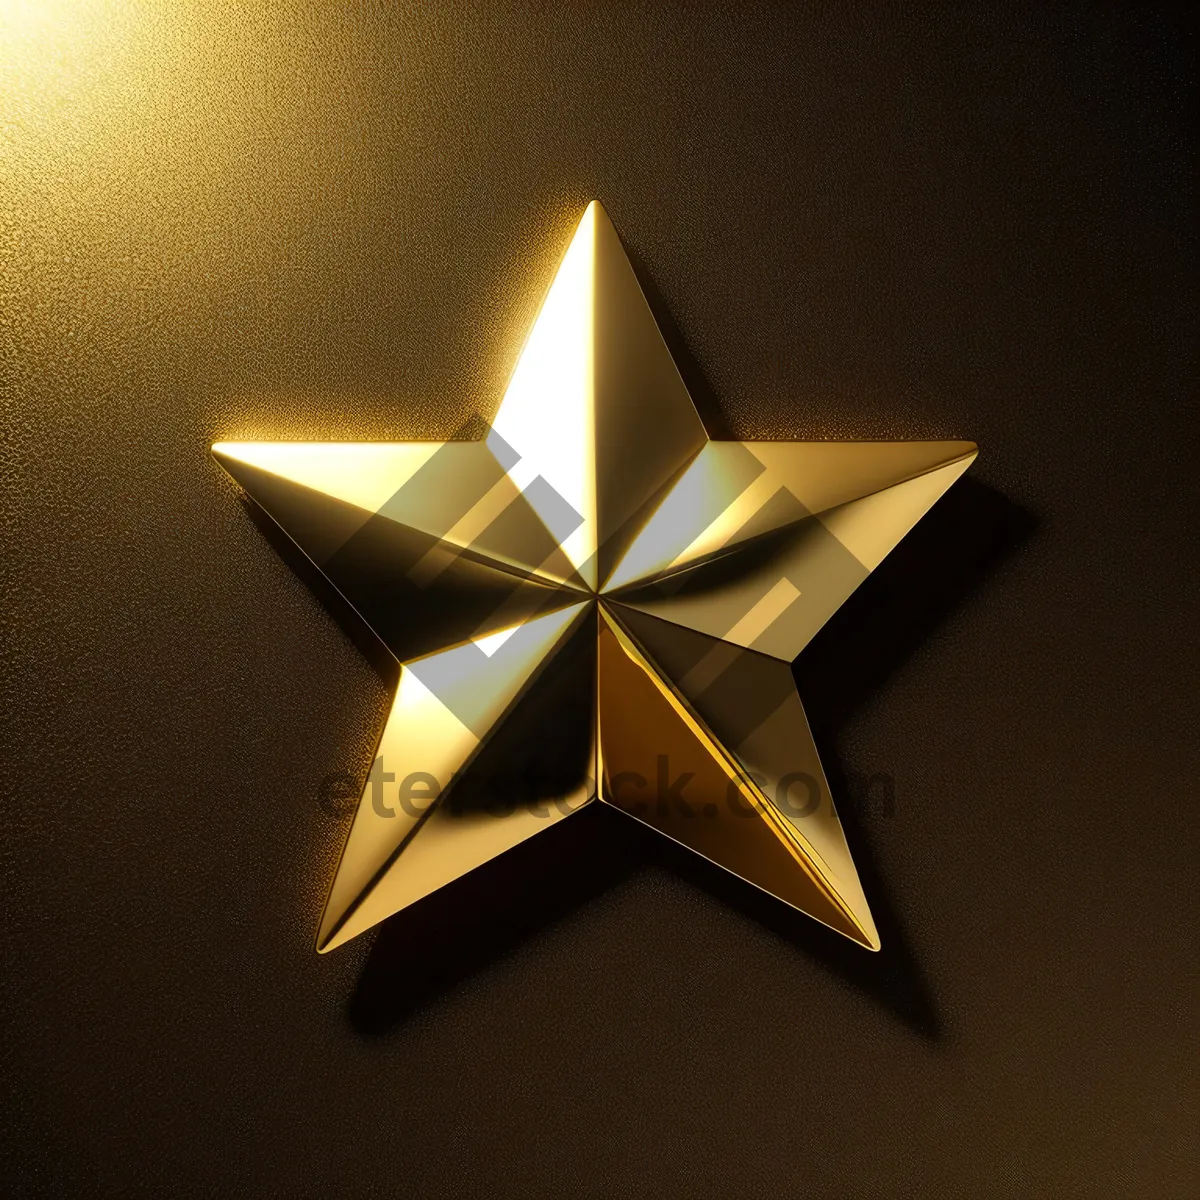 Picture of Shiny Five-Spot Gem Icon with Star Sconce